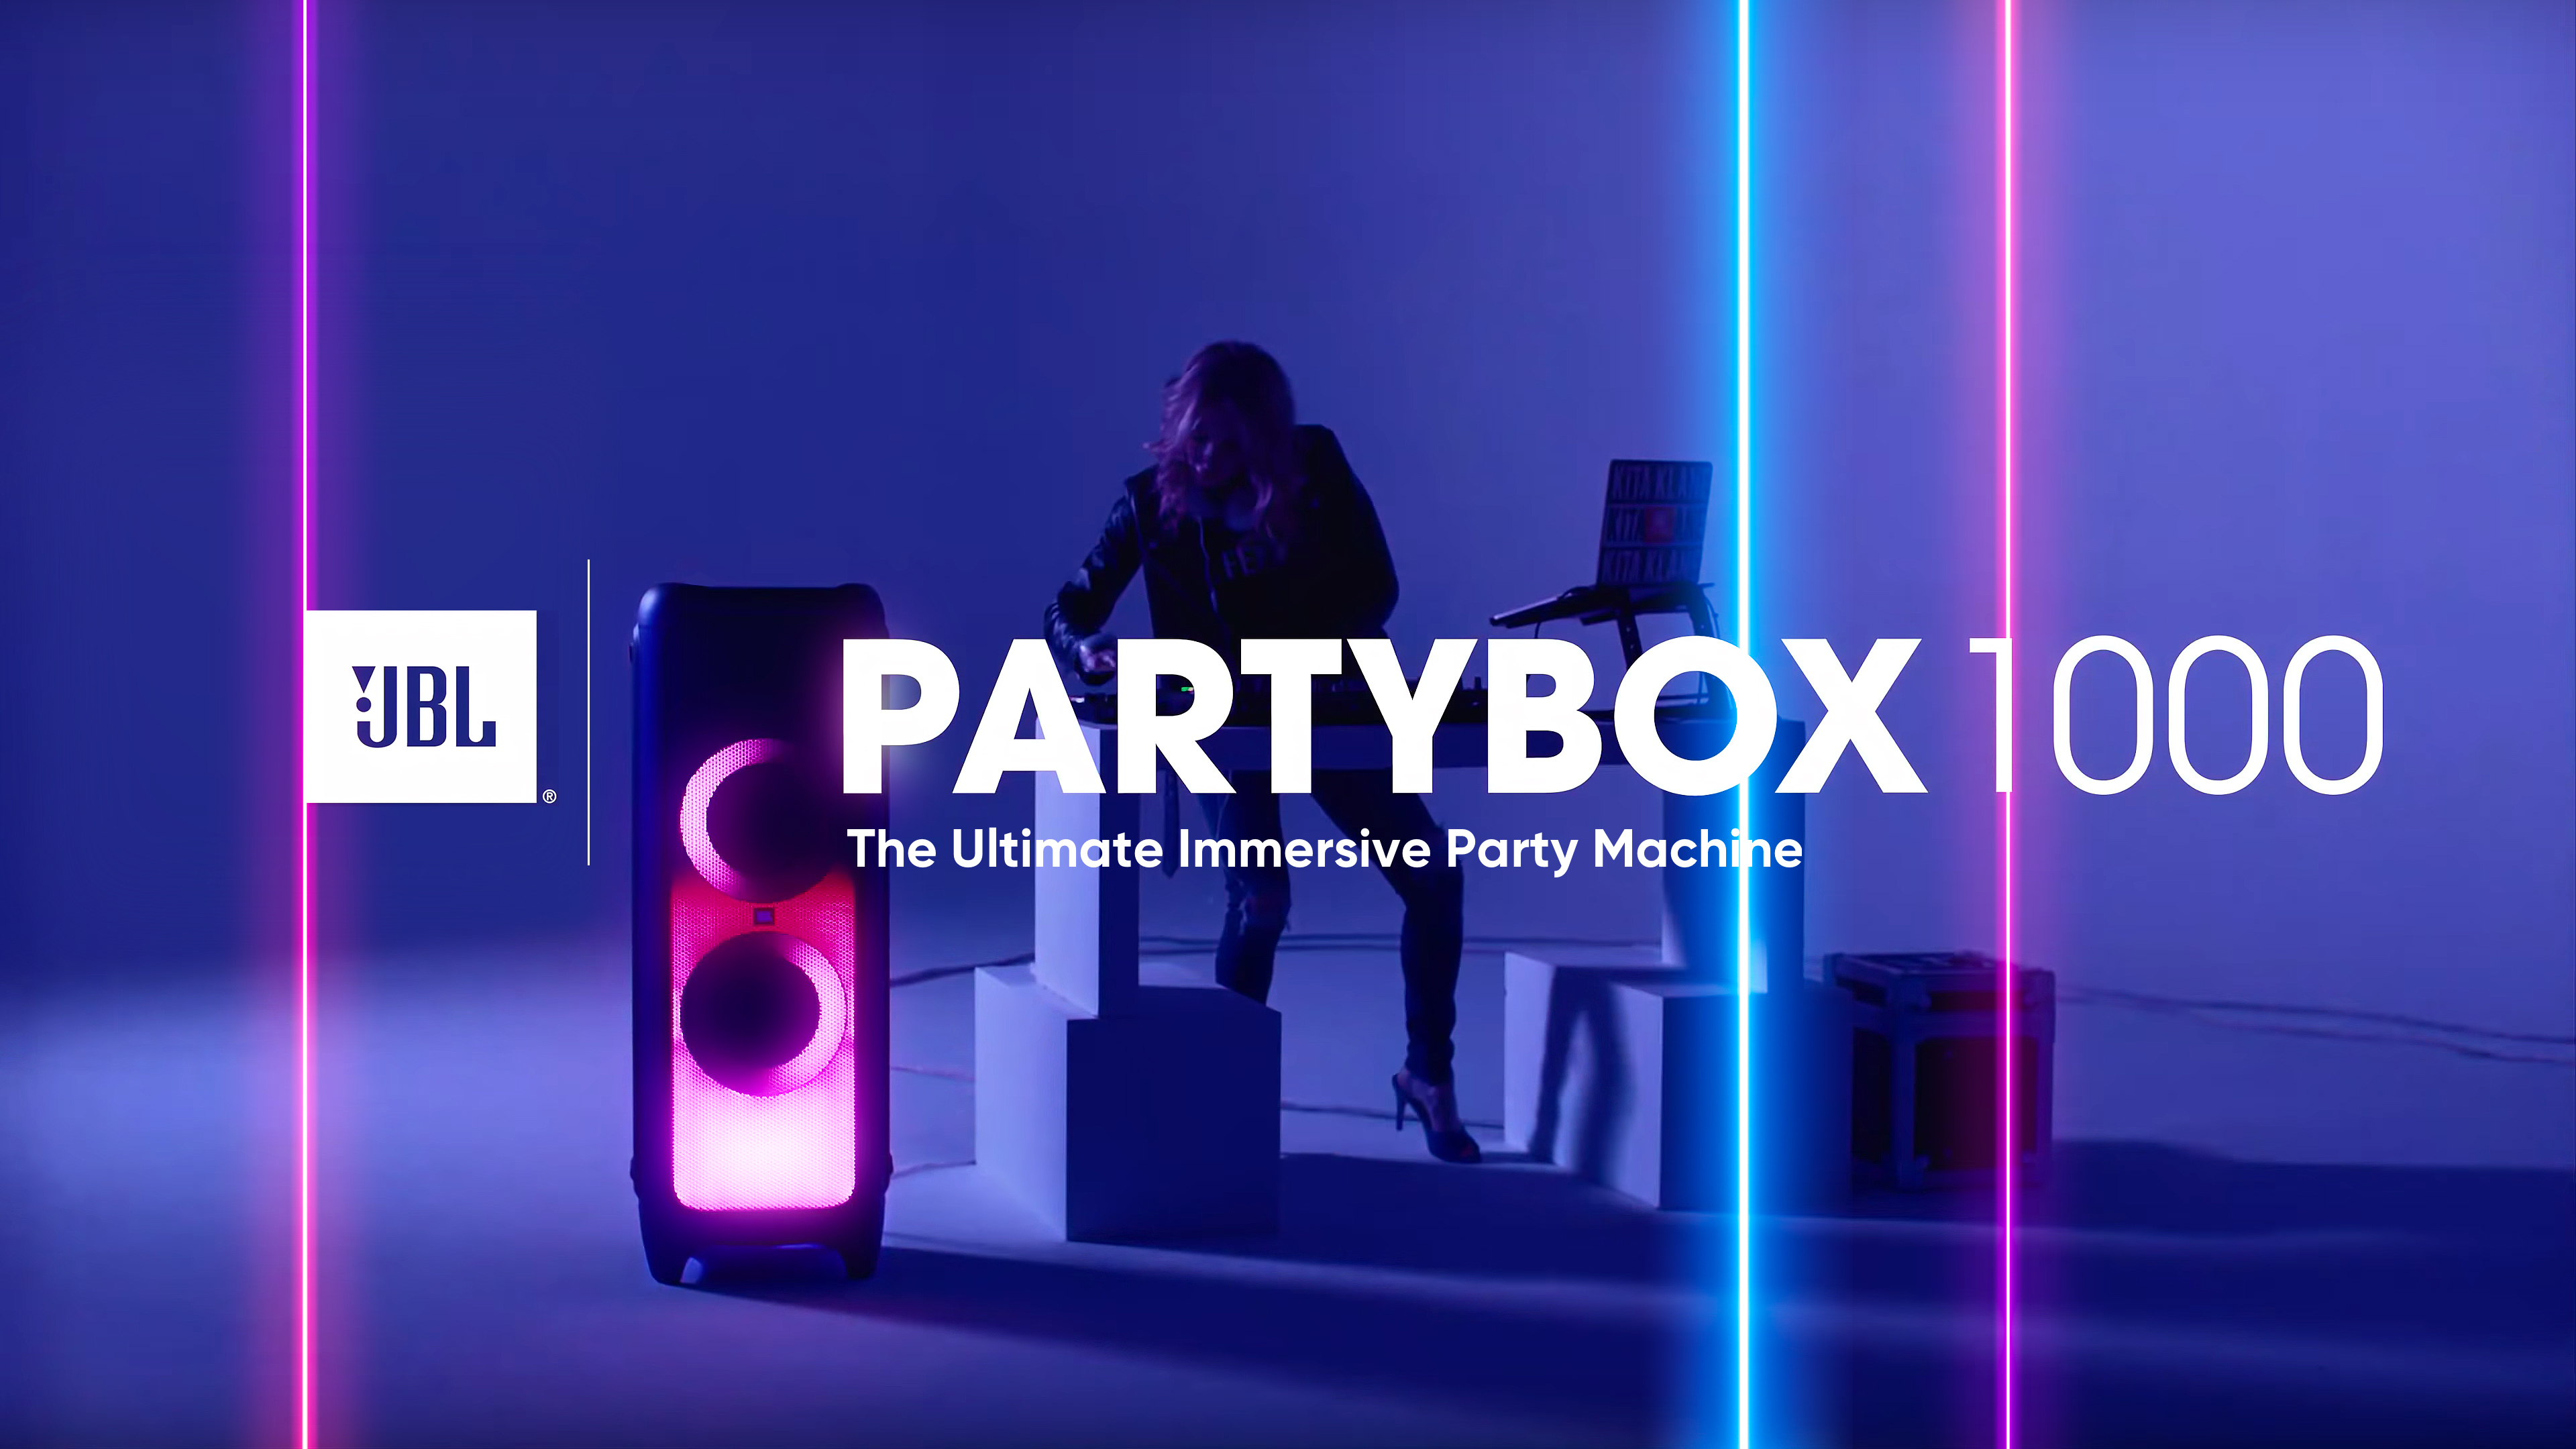 JBL Partybox 1000 experience